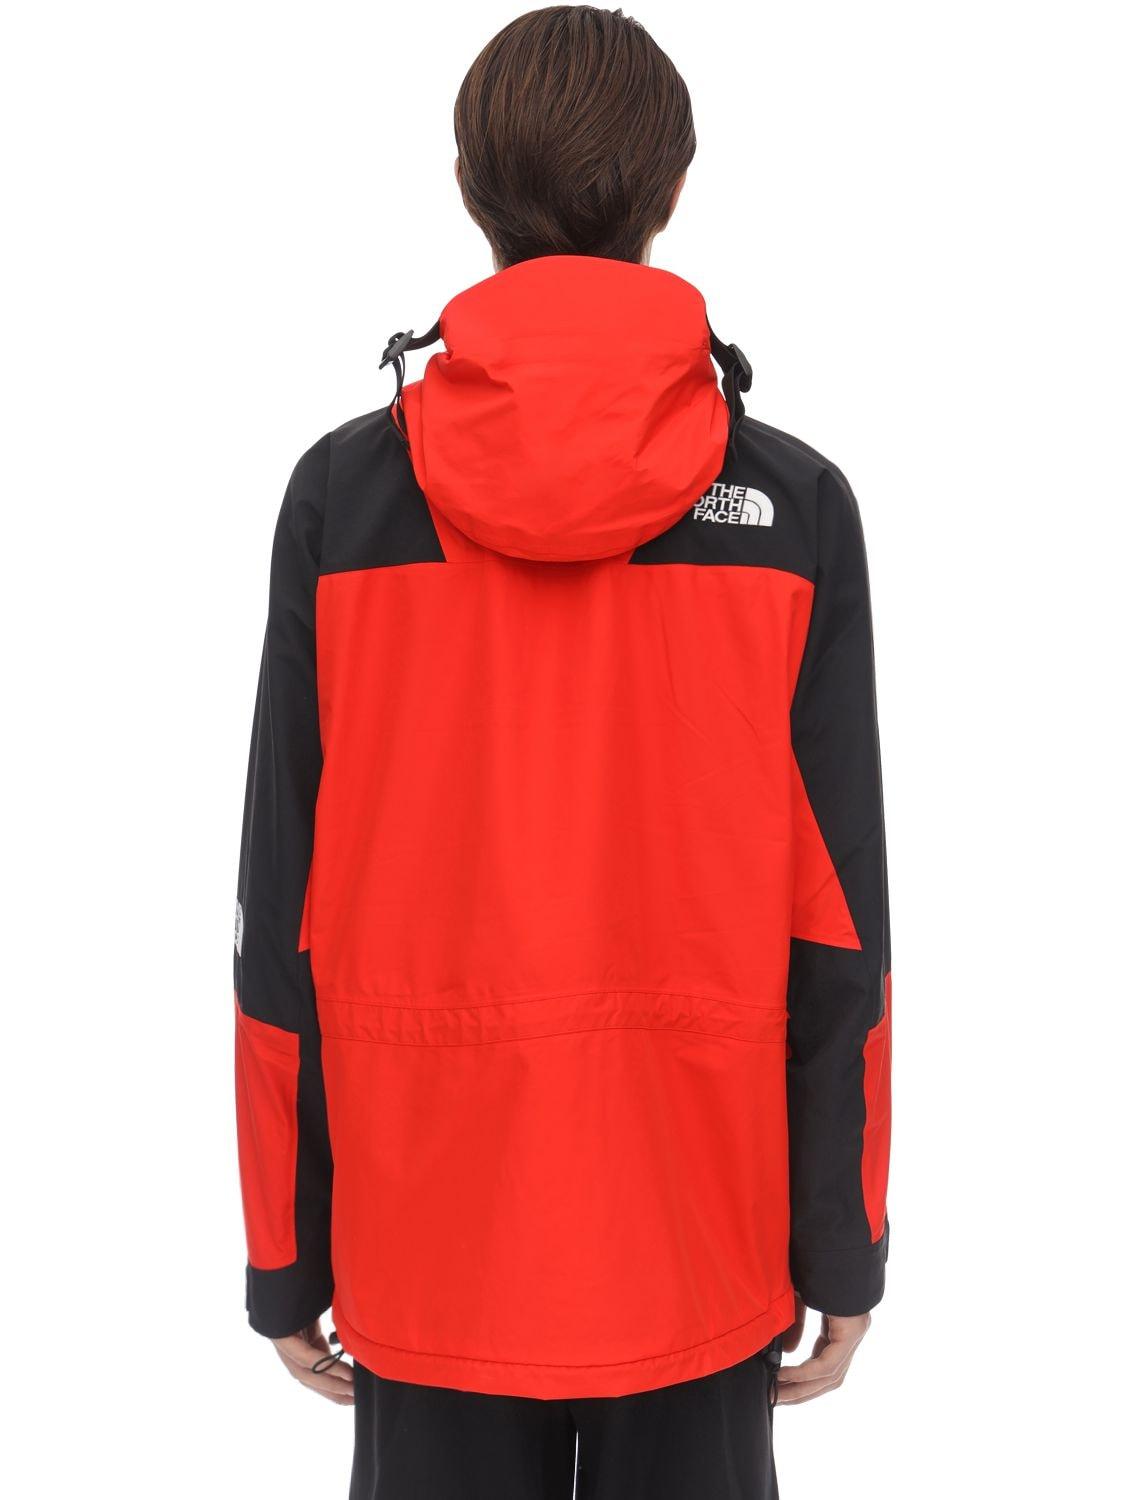 The North Face Synthetic 1996 Retro Nuptse Vest in Red - Lyst